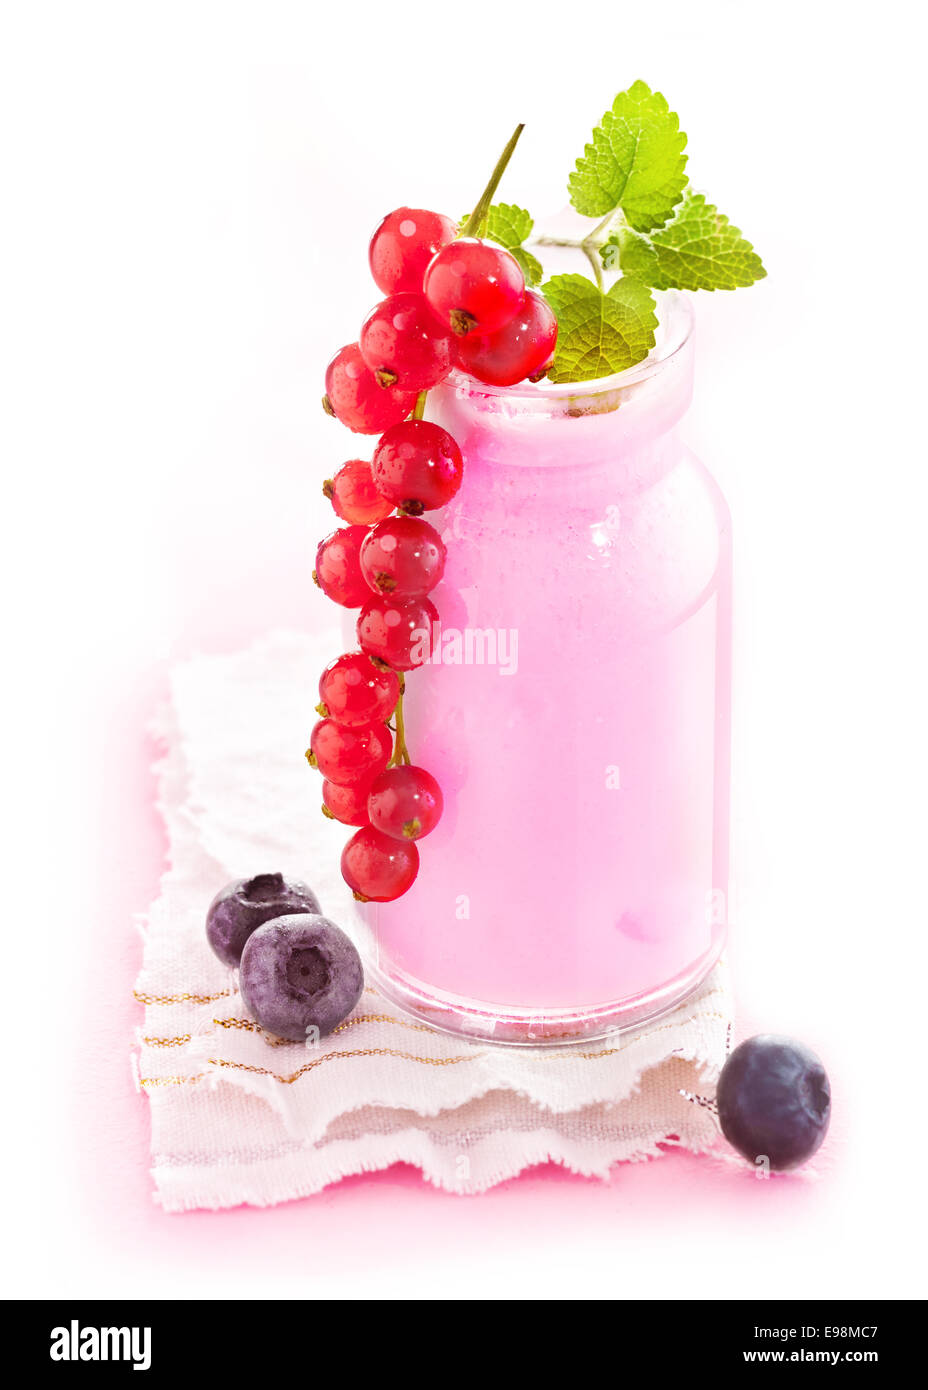 Healthy berry smoothie in a glass jar with delicious ripe red currants hanging over the side Stock Photo